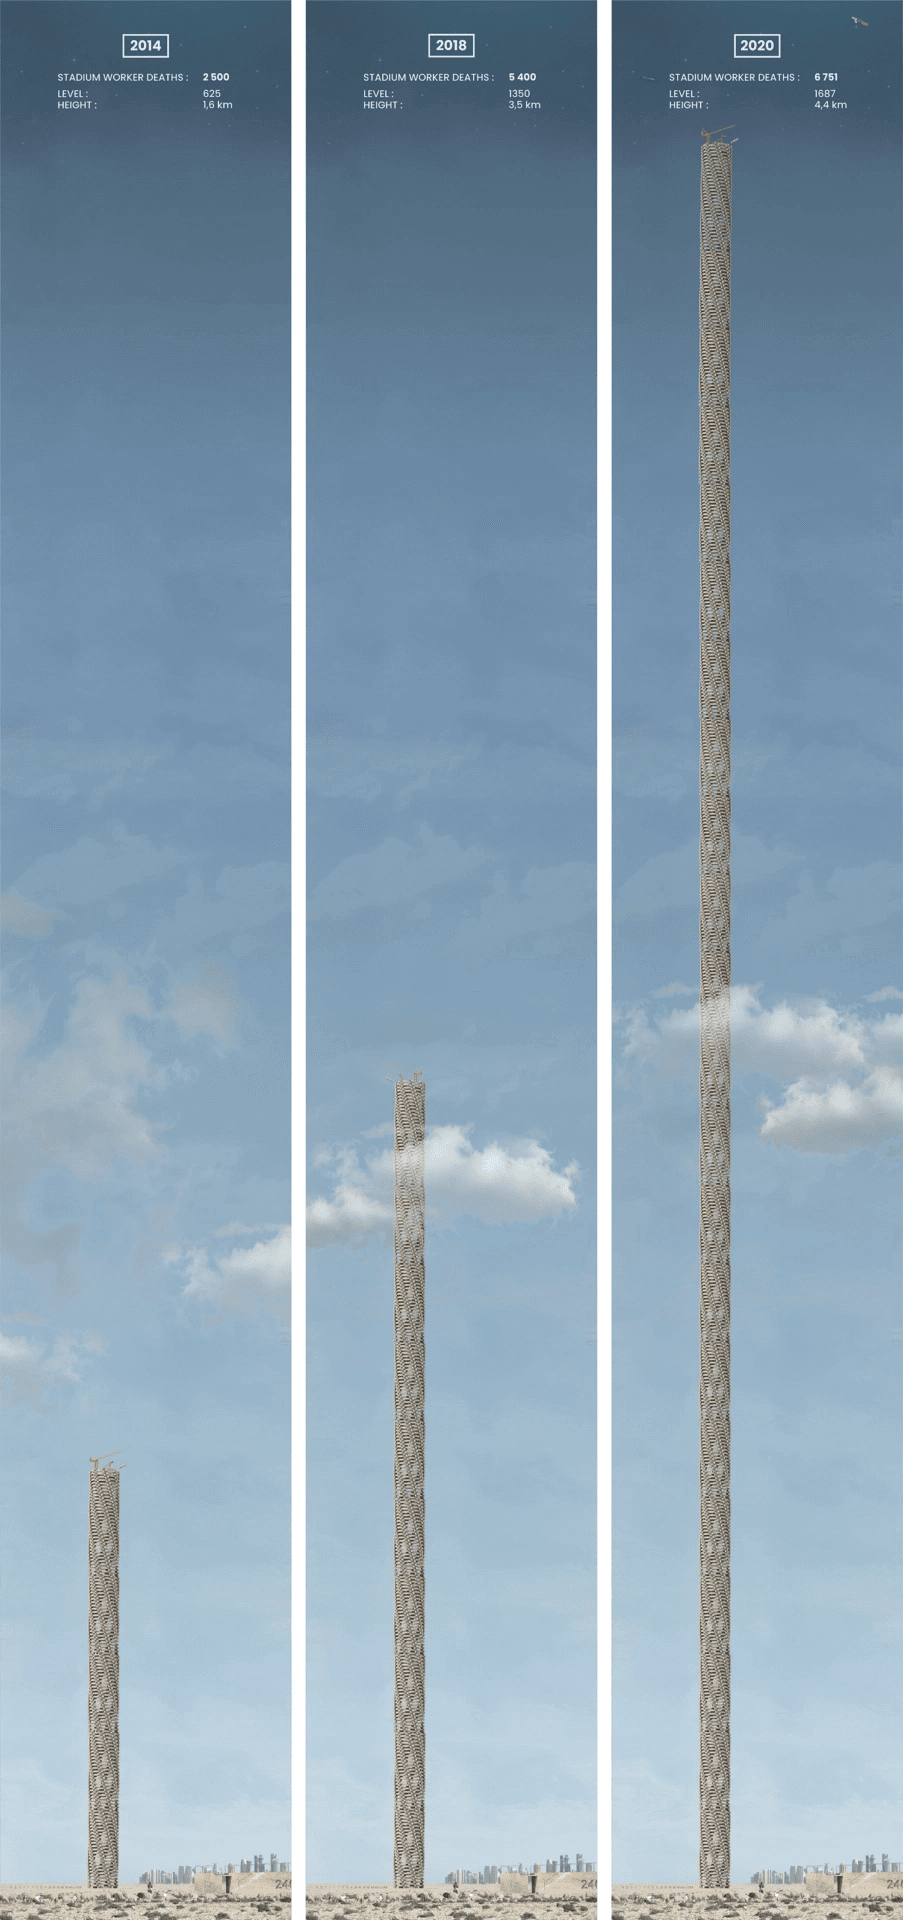 A series of three photographs of a tall tower
